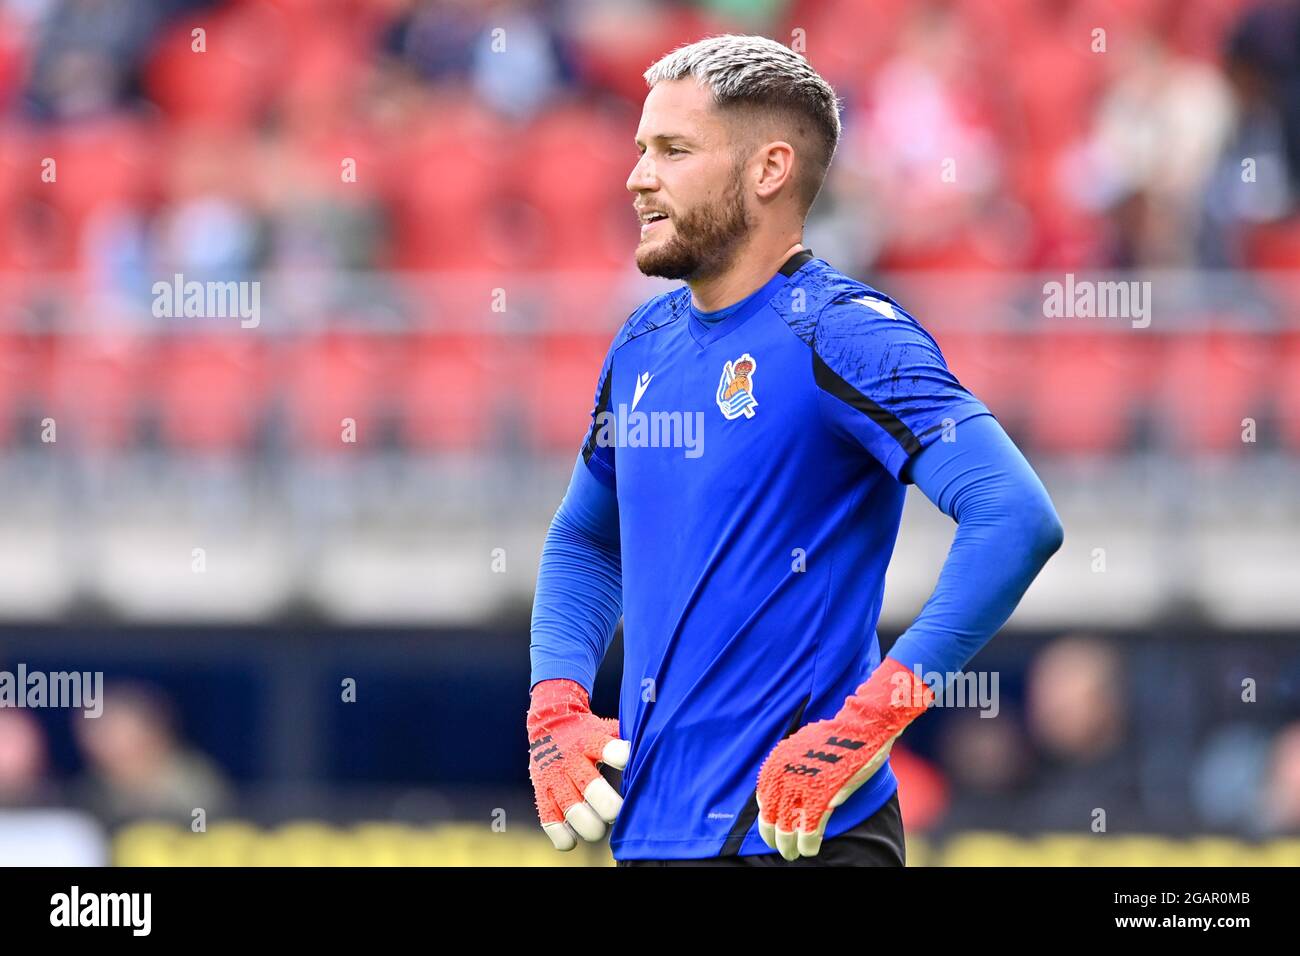 ALKMAAR, NETHERLANDS - JULY 31: Goalkeeper Alejandro Remiro of Real Sociedad warming up during the Pre Season Friendly match between AZ and Real Sociedad at the AFAS Stadion on July 31, 2021 in Alkmaar, Netherlands (Photo by Patrick Goosen/Orange Pictures) Stock Photo